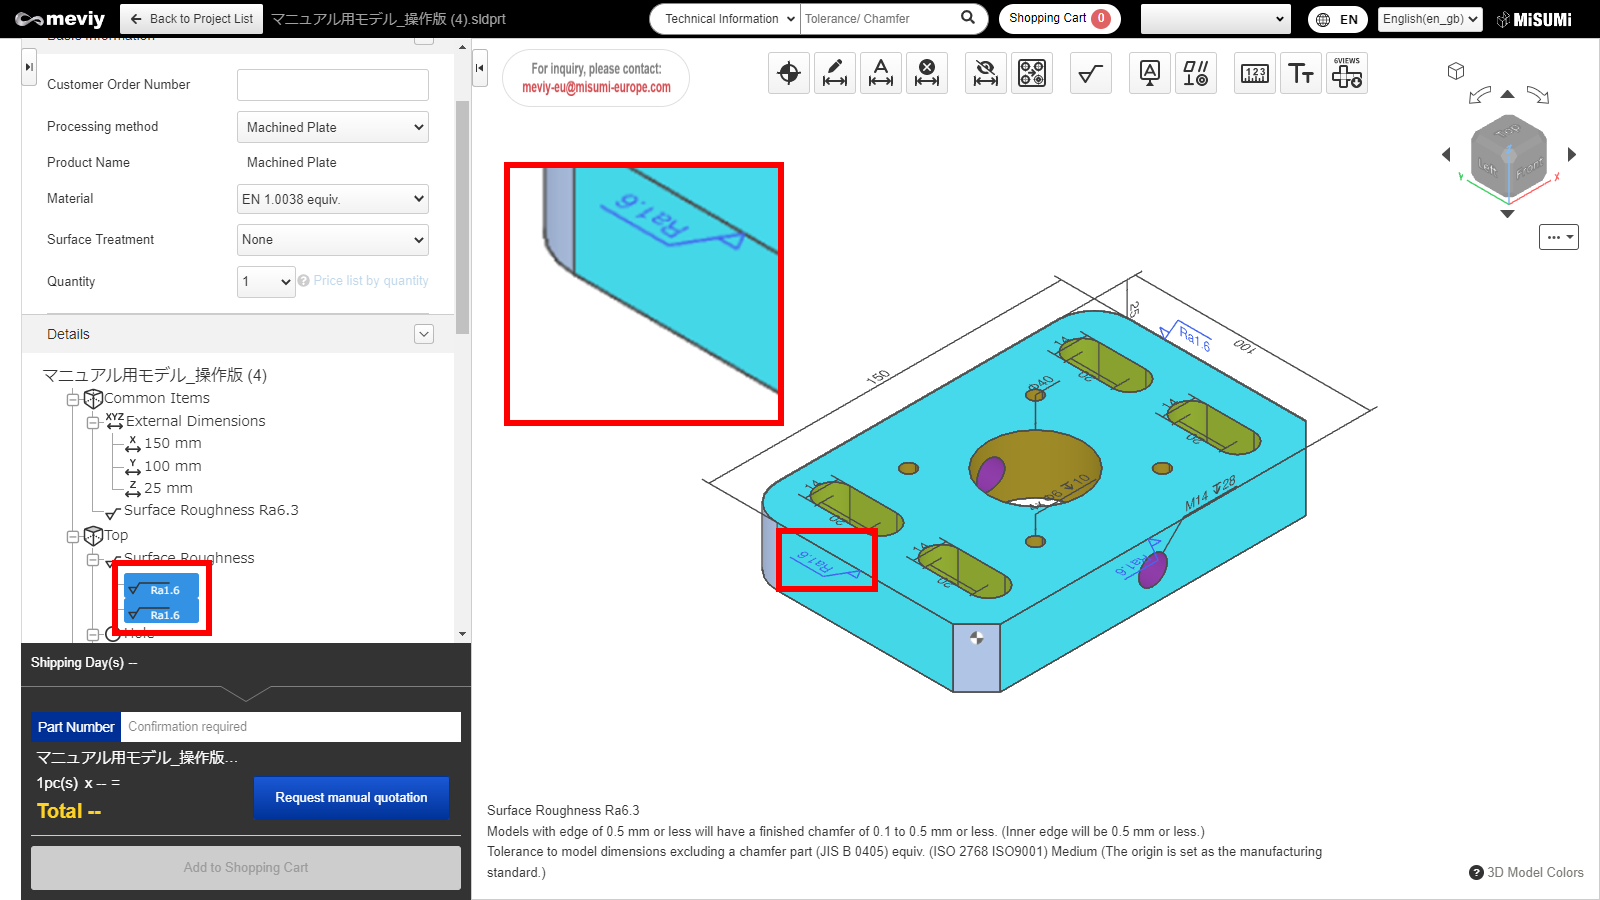 The added surface roughness can be viewed on the 3D model and tree view.